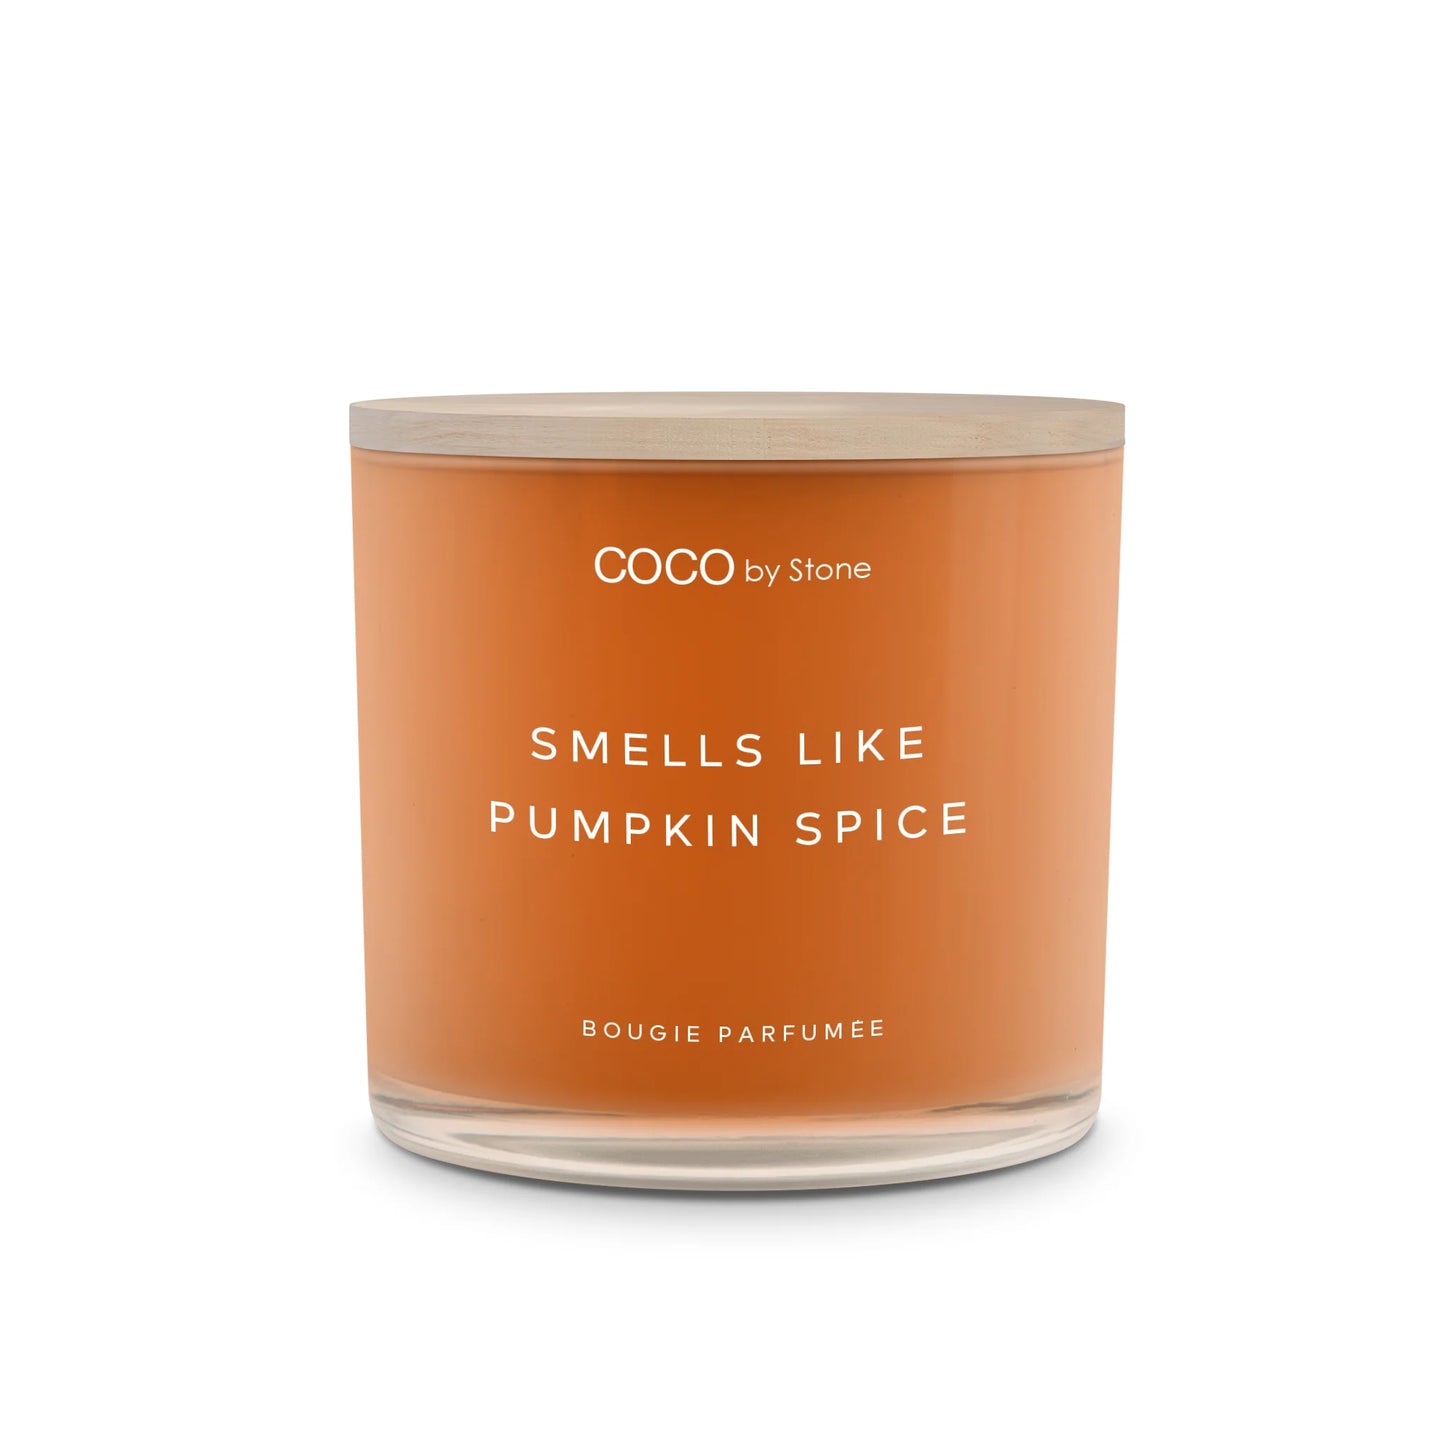 Broluxe Ltd. Co. XL American Bully COCO by Stone Pumpkin Spice - Pet Safe Coconut Wax Candle - Food Grade Certified